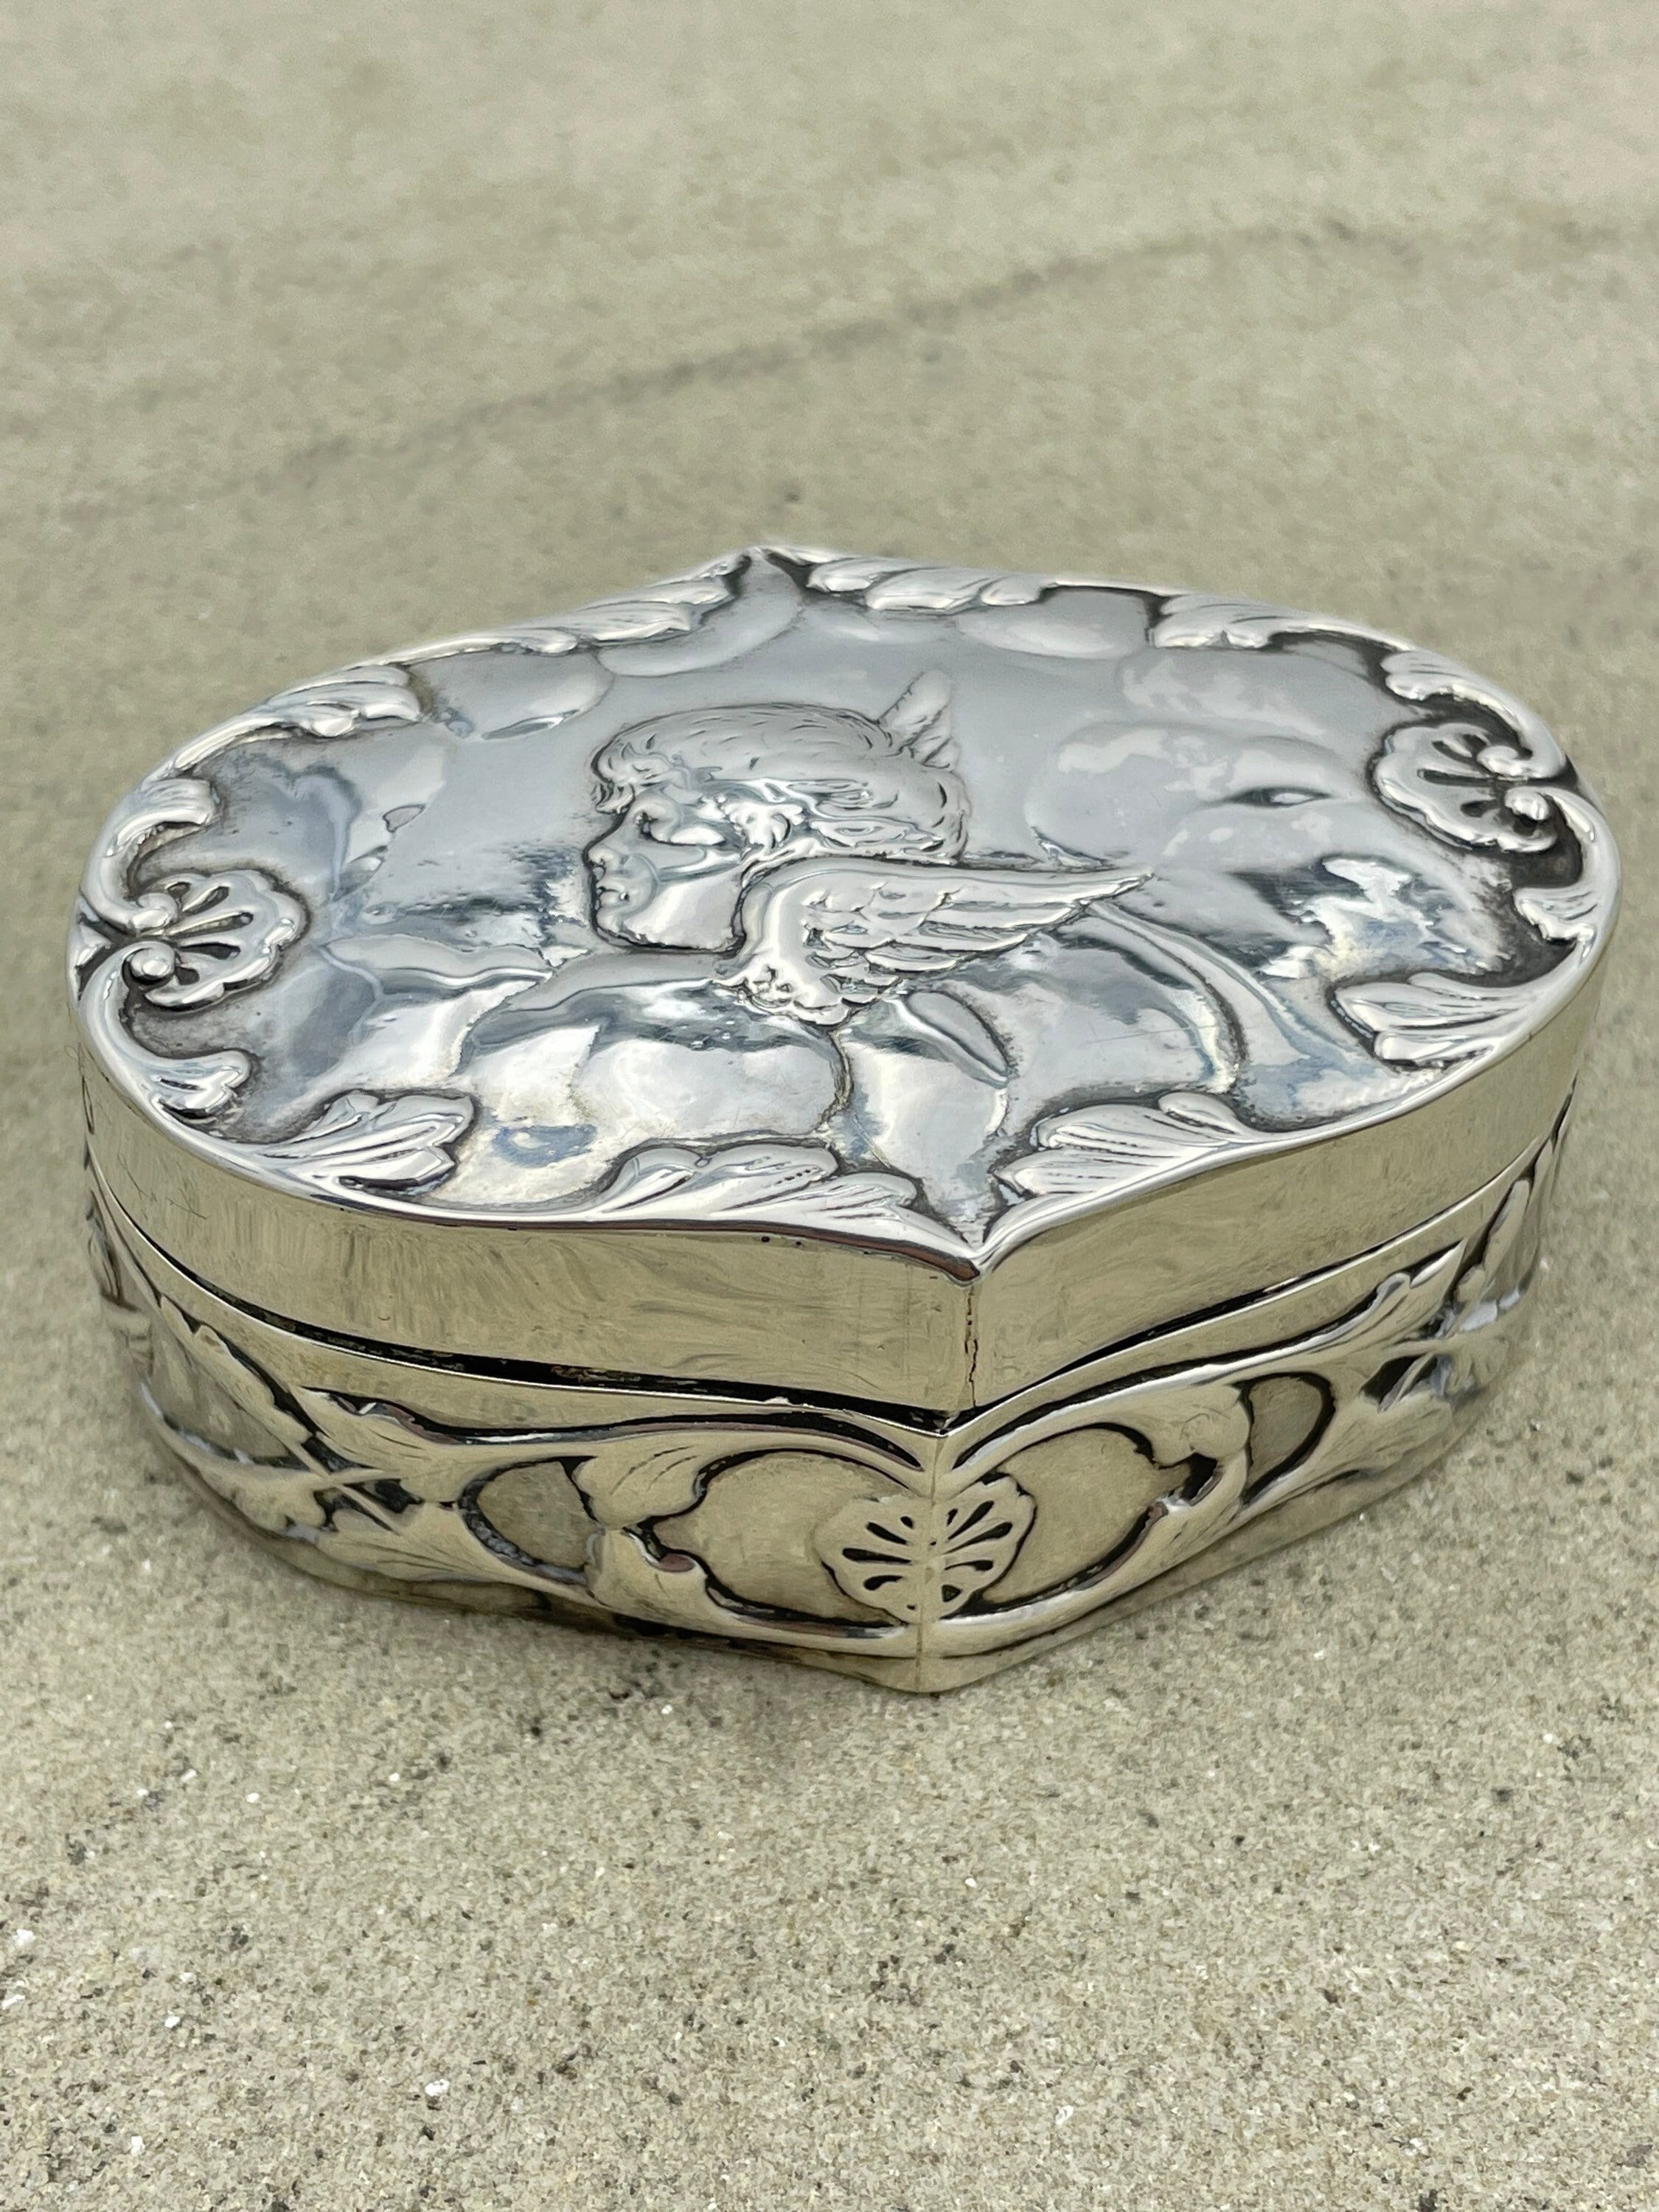 The Gryphon's Nest | Antique ring box, Antique silver rings, Antique silver